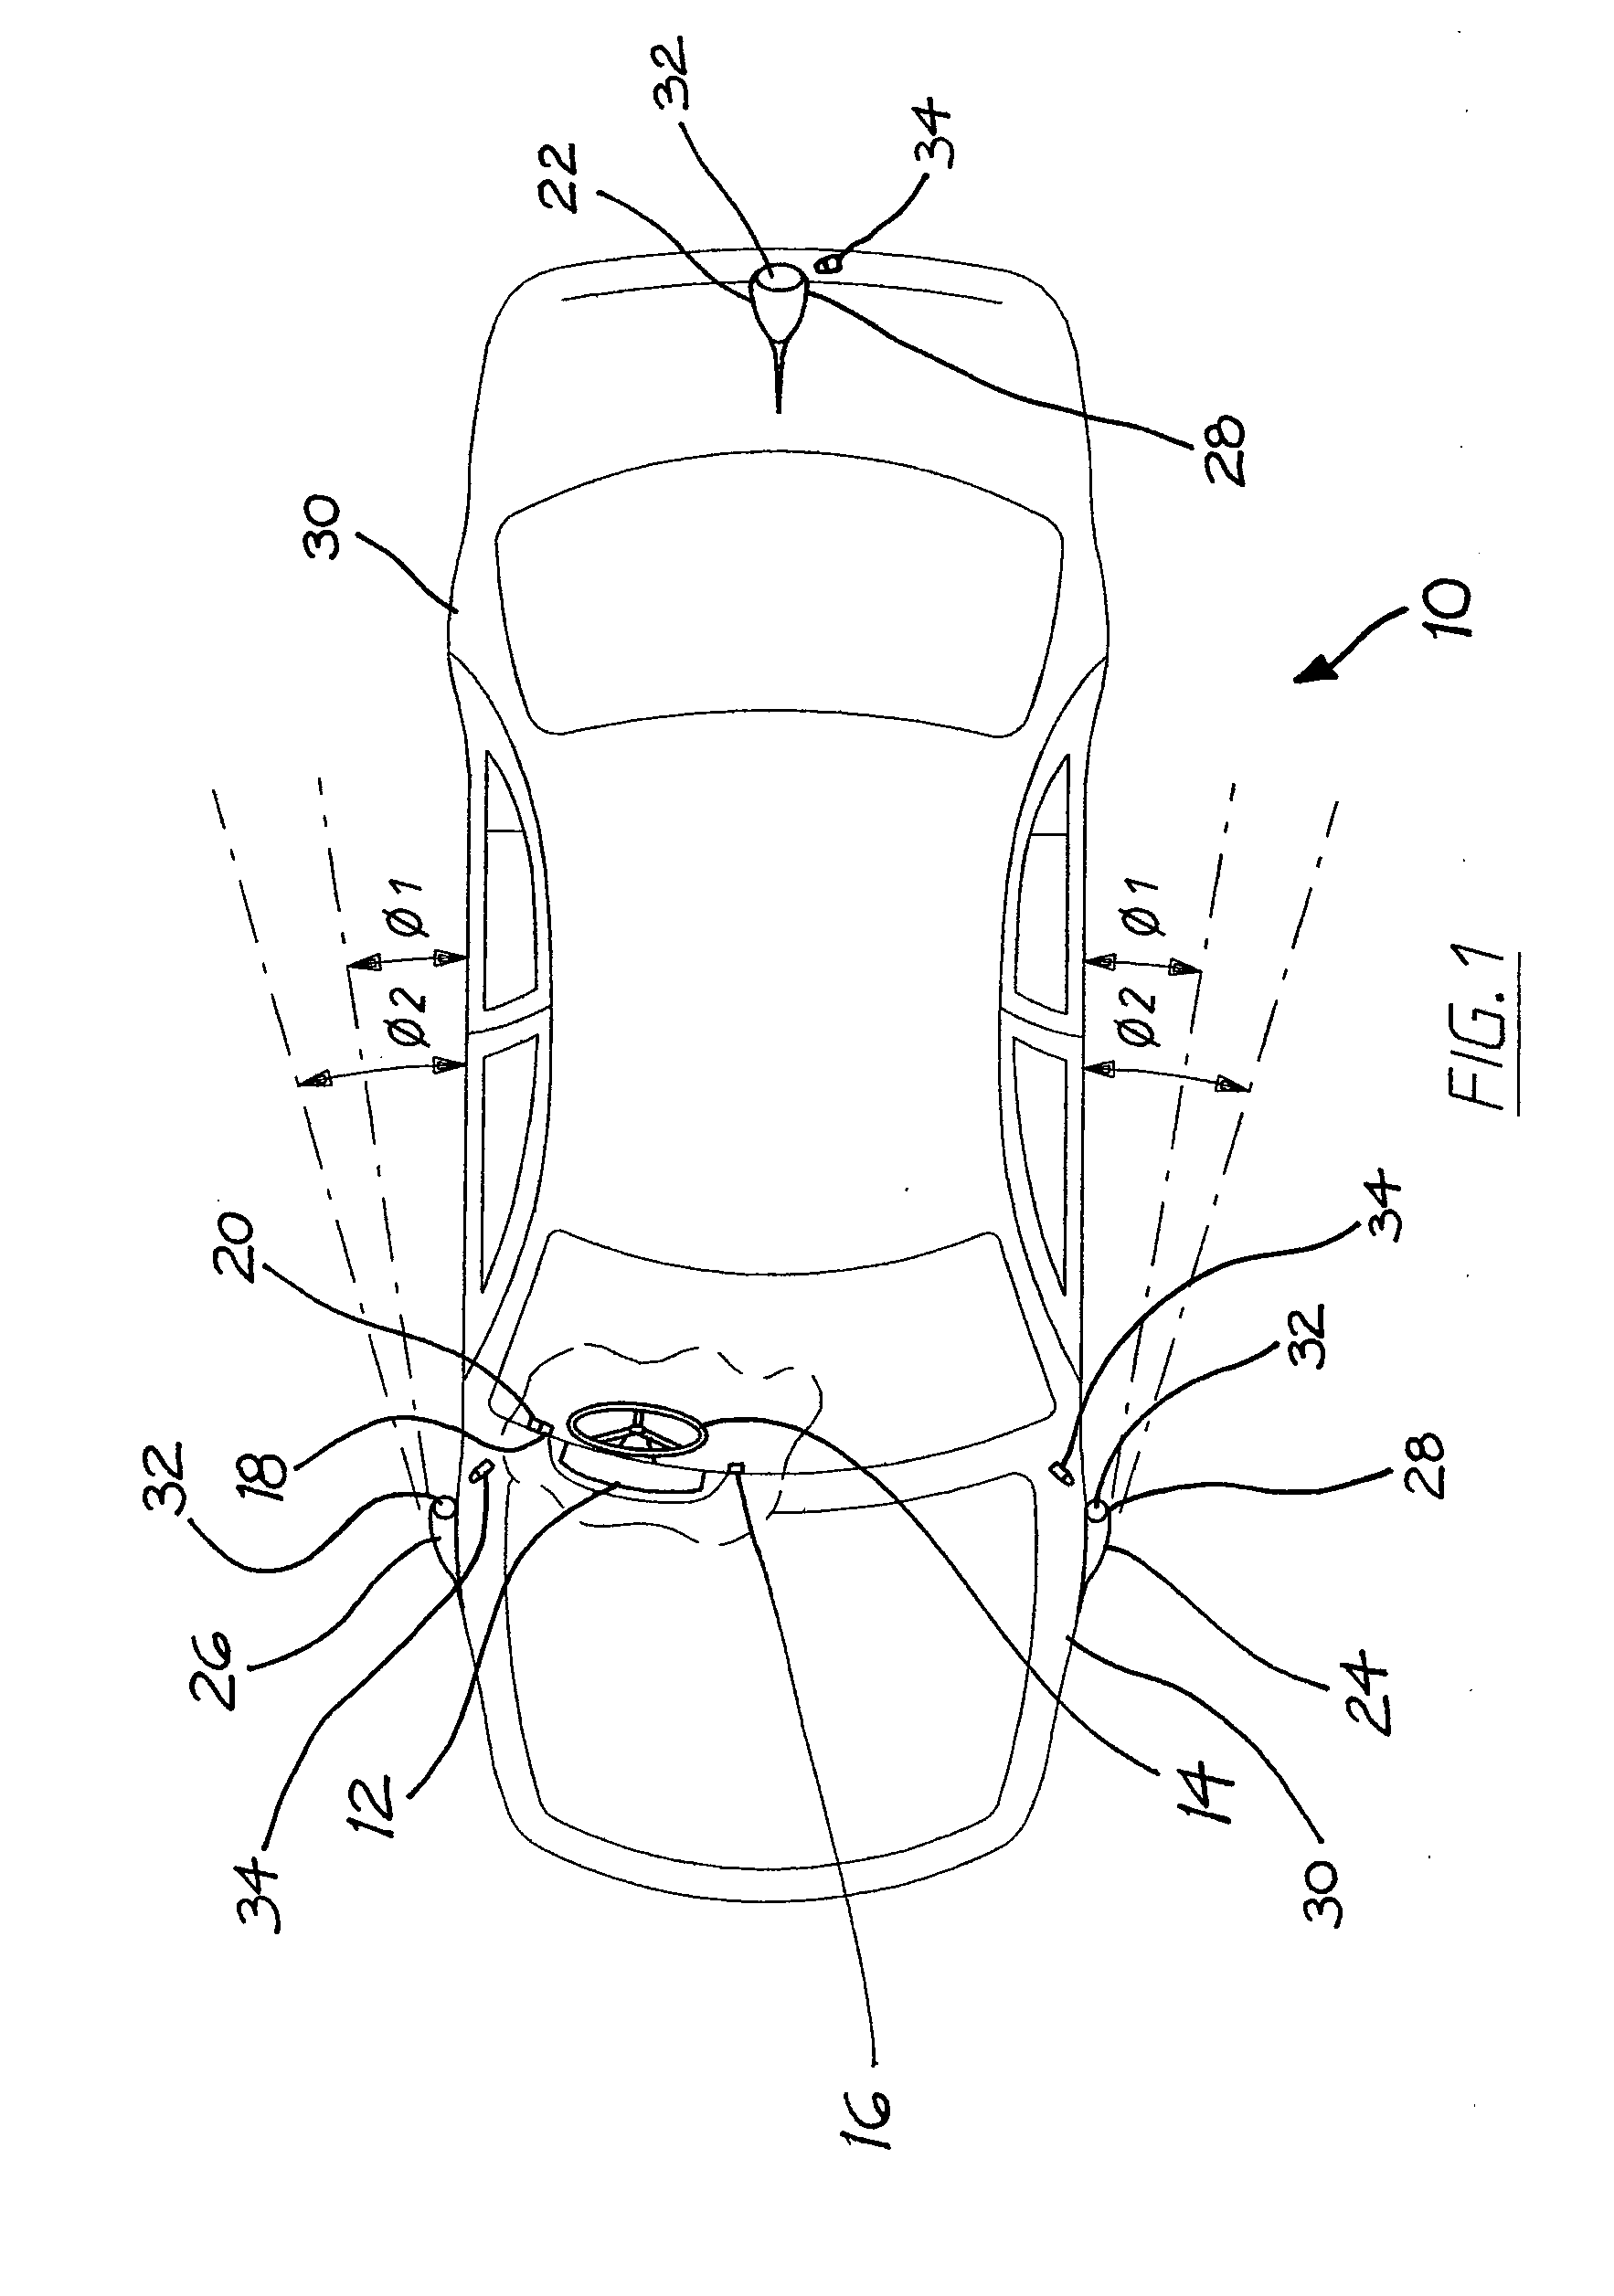 Rear Vision Video Camera and Display Screen System for a Vehicle